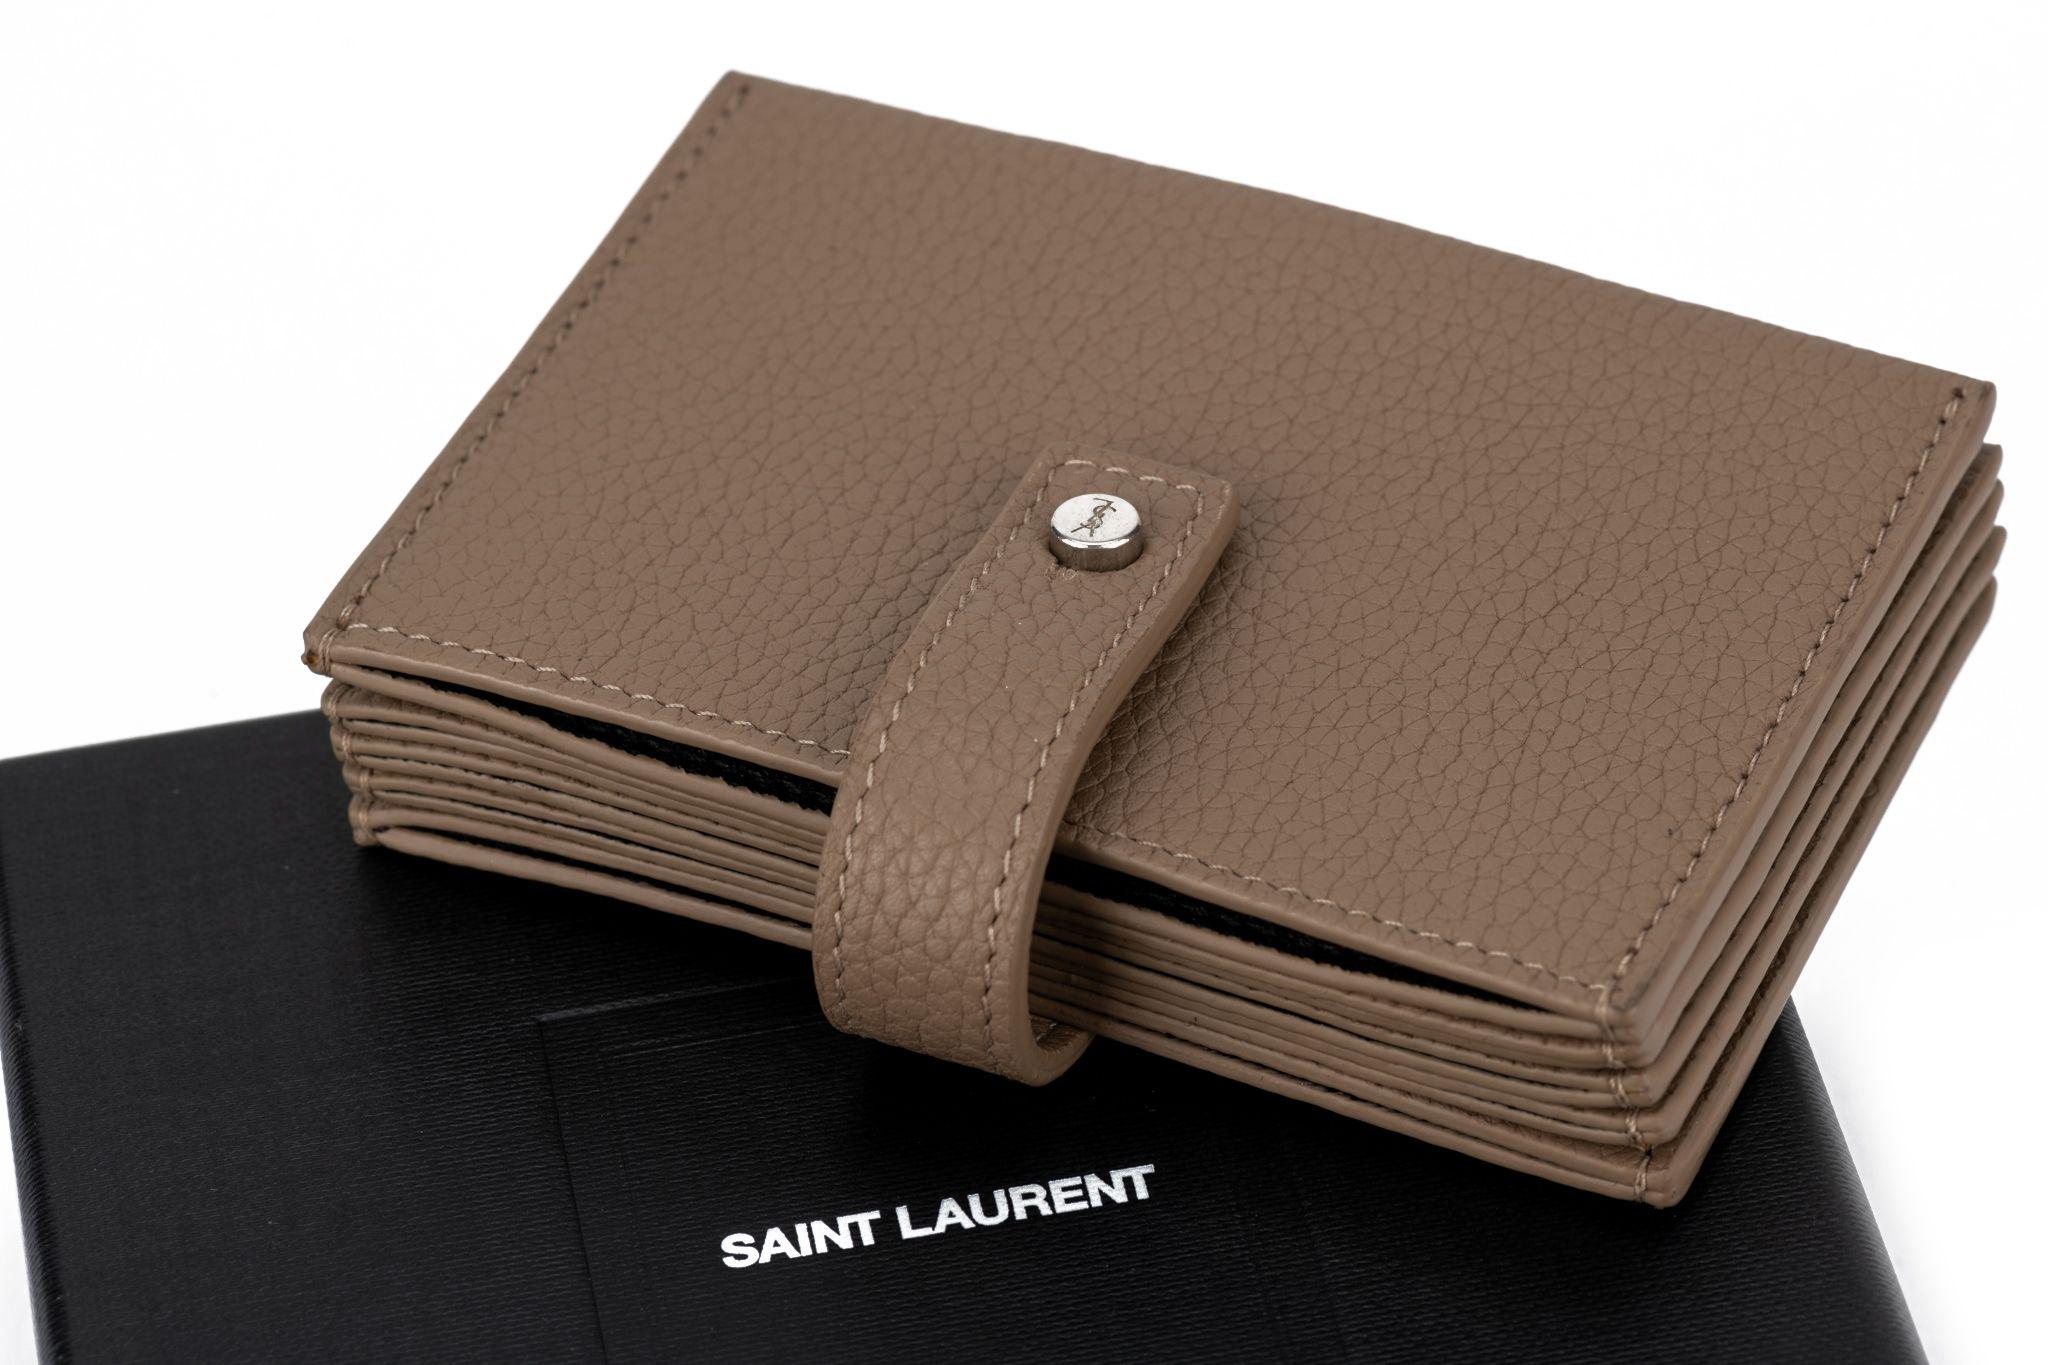 YSL brand new unisex credit card wallet, camel pebbled leather with logo silver details.
Comes with original dustcover and box.